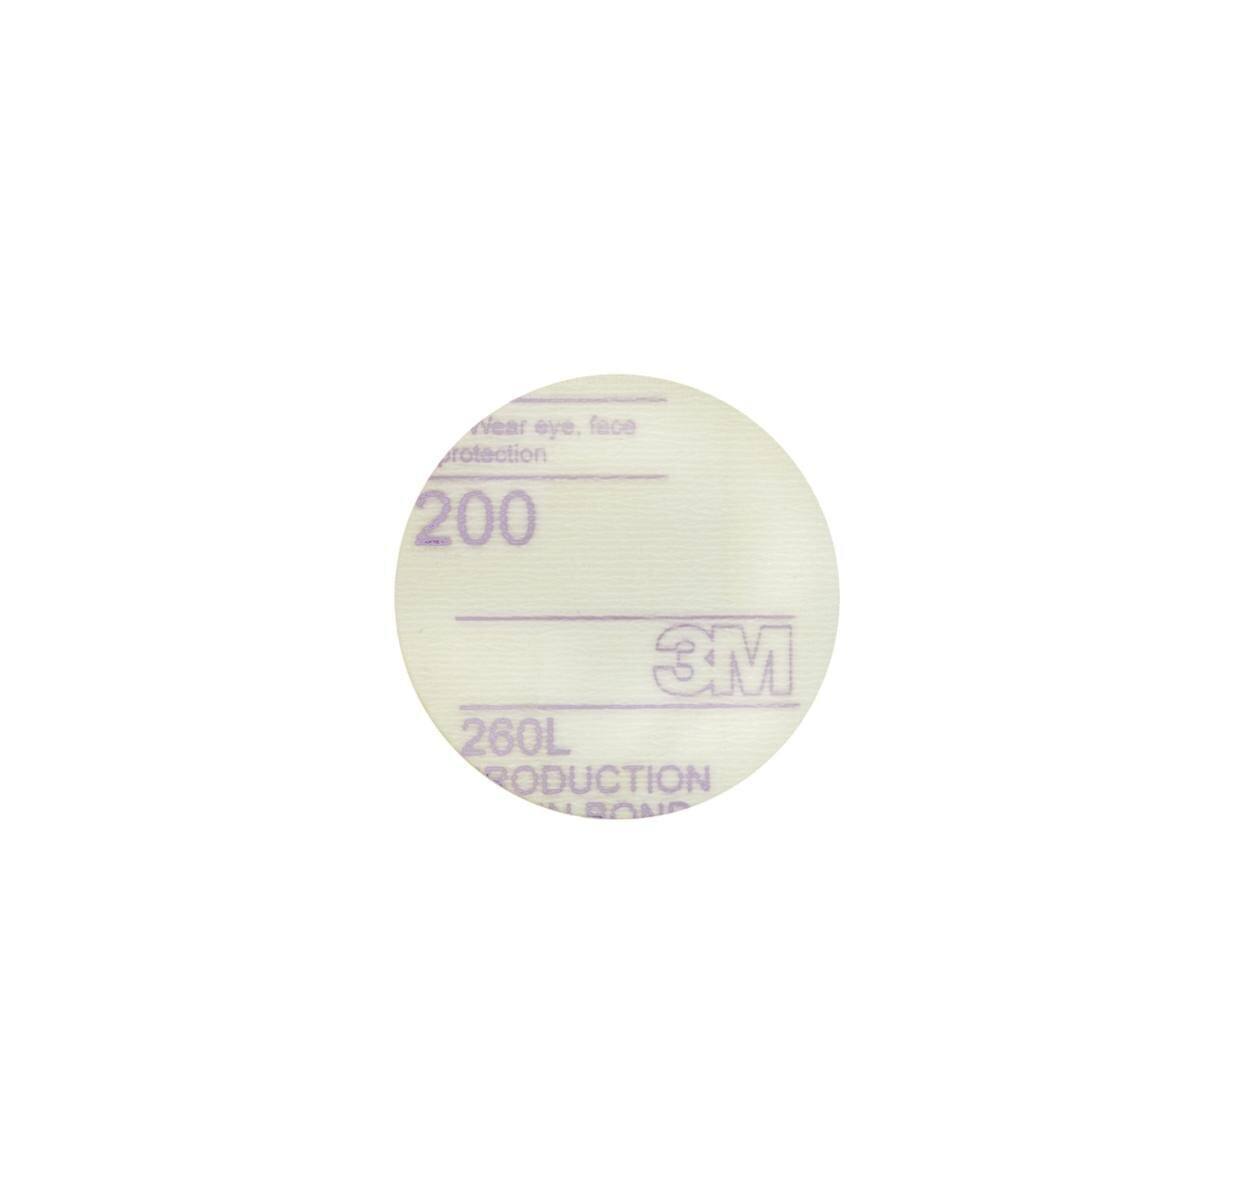 3M Hookit hook and loop adhesive disk 260L, white, 76 mm, P1200, unpunched #E00908